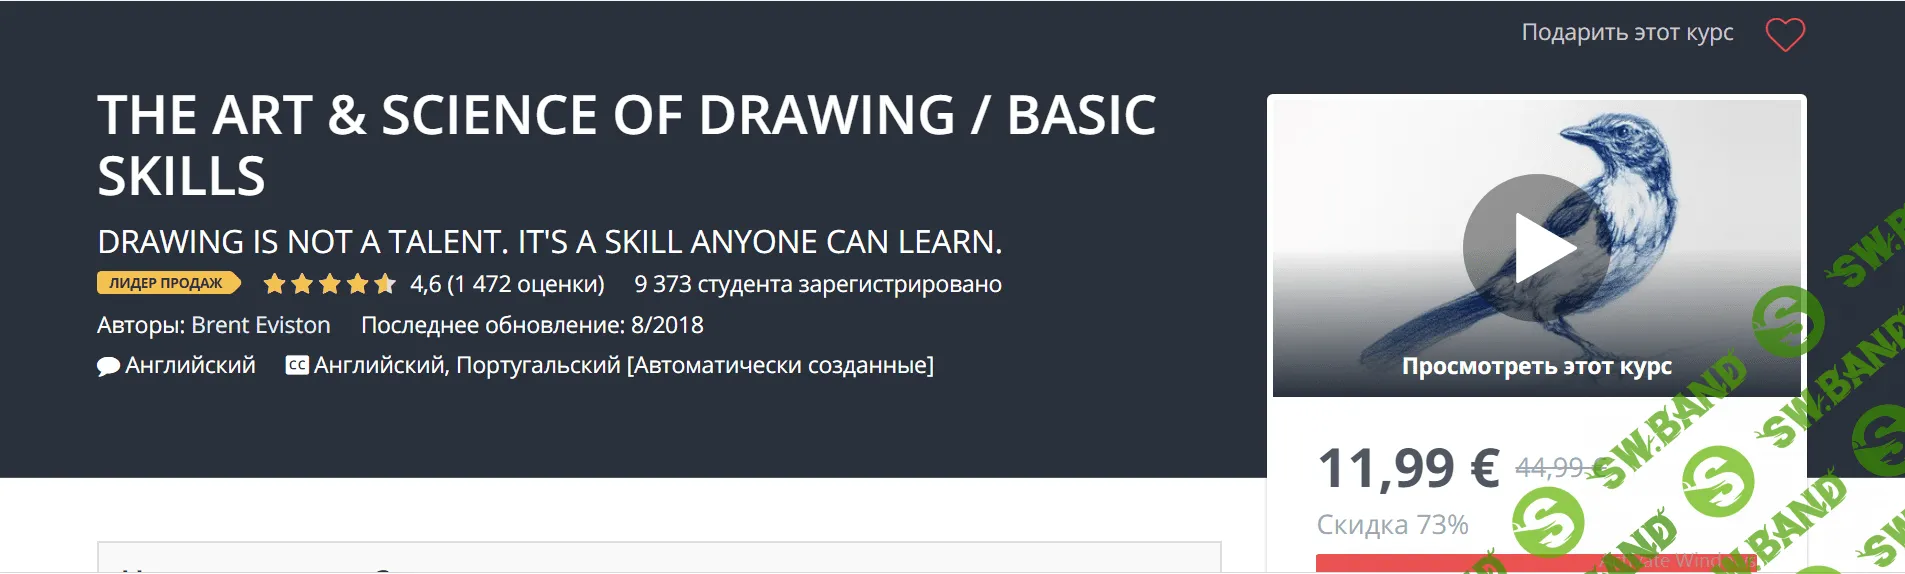 [Udemy] The Art & Science of Drawing / Basic Skills (2018)